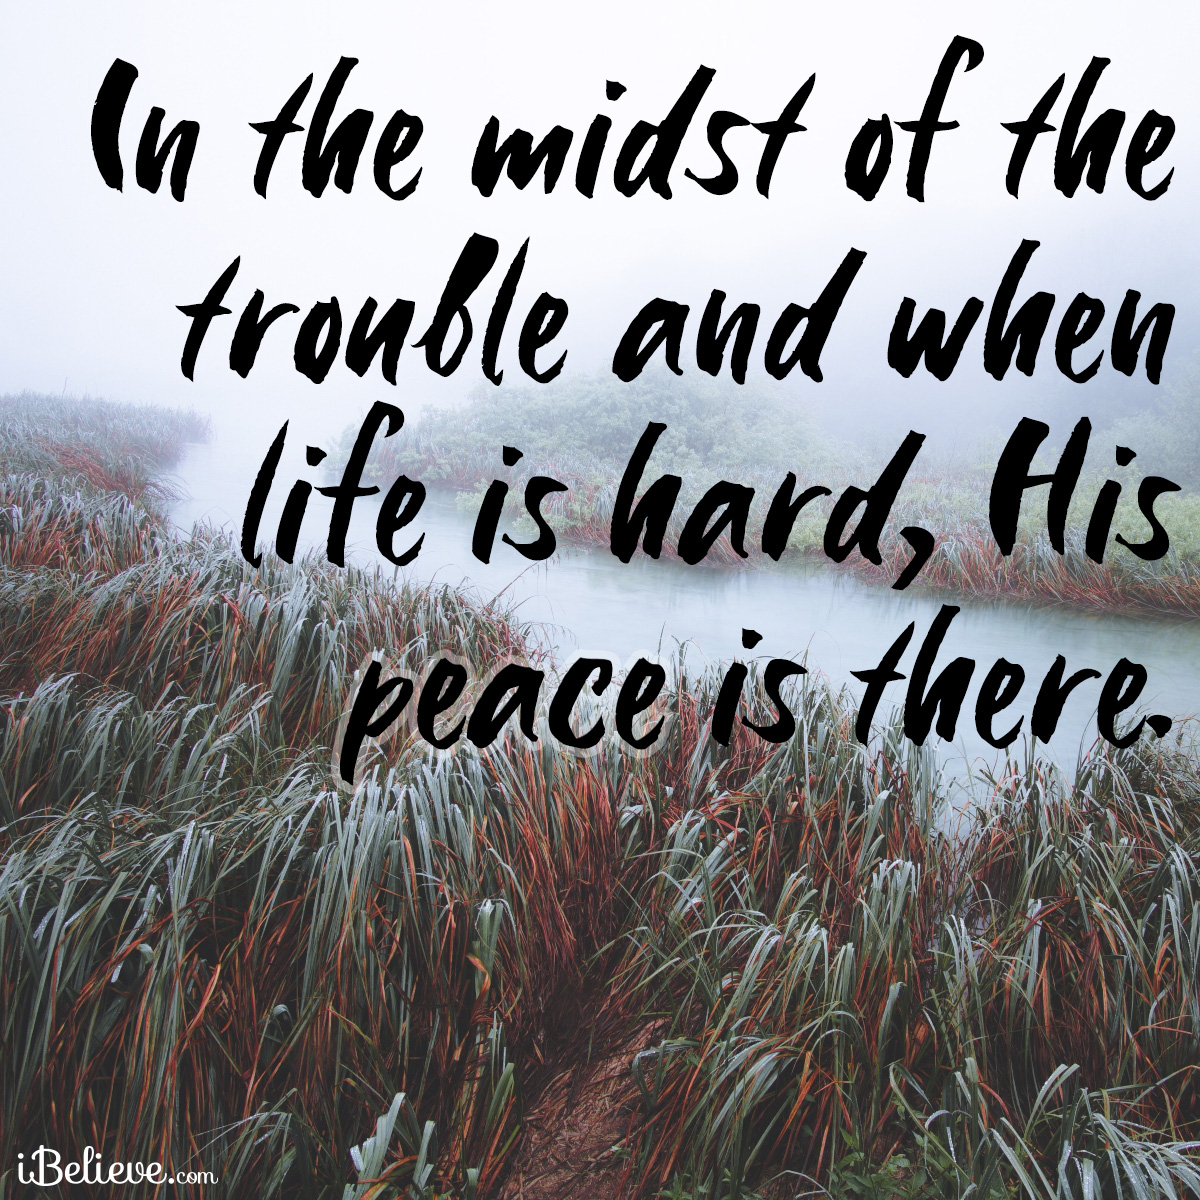 Gods peace is with us, inspirational image